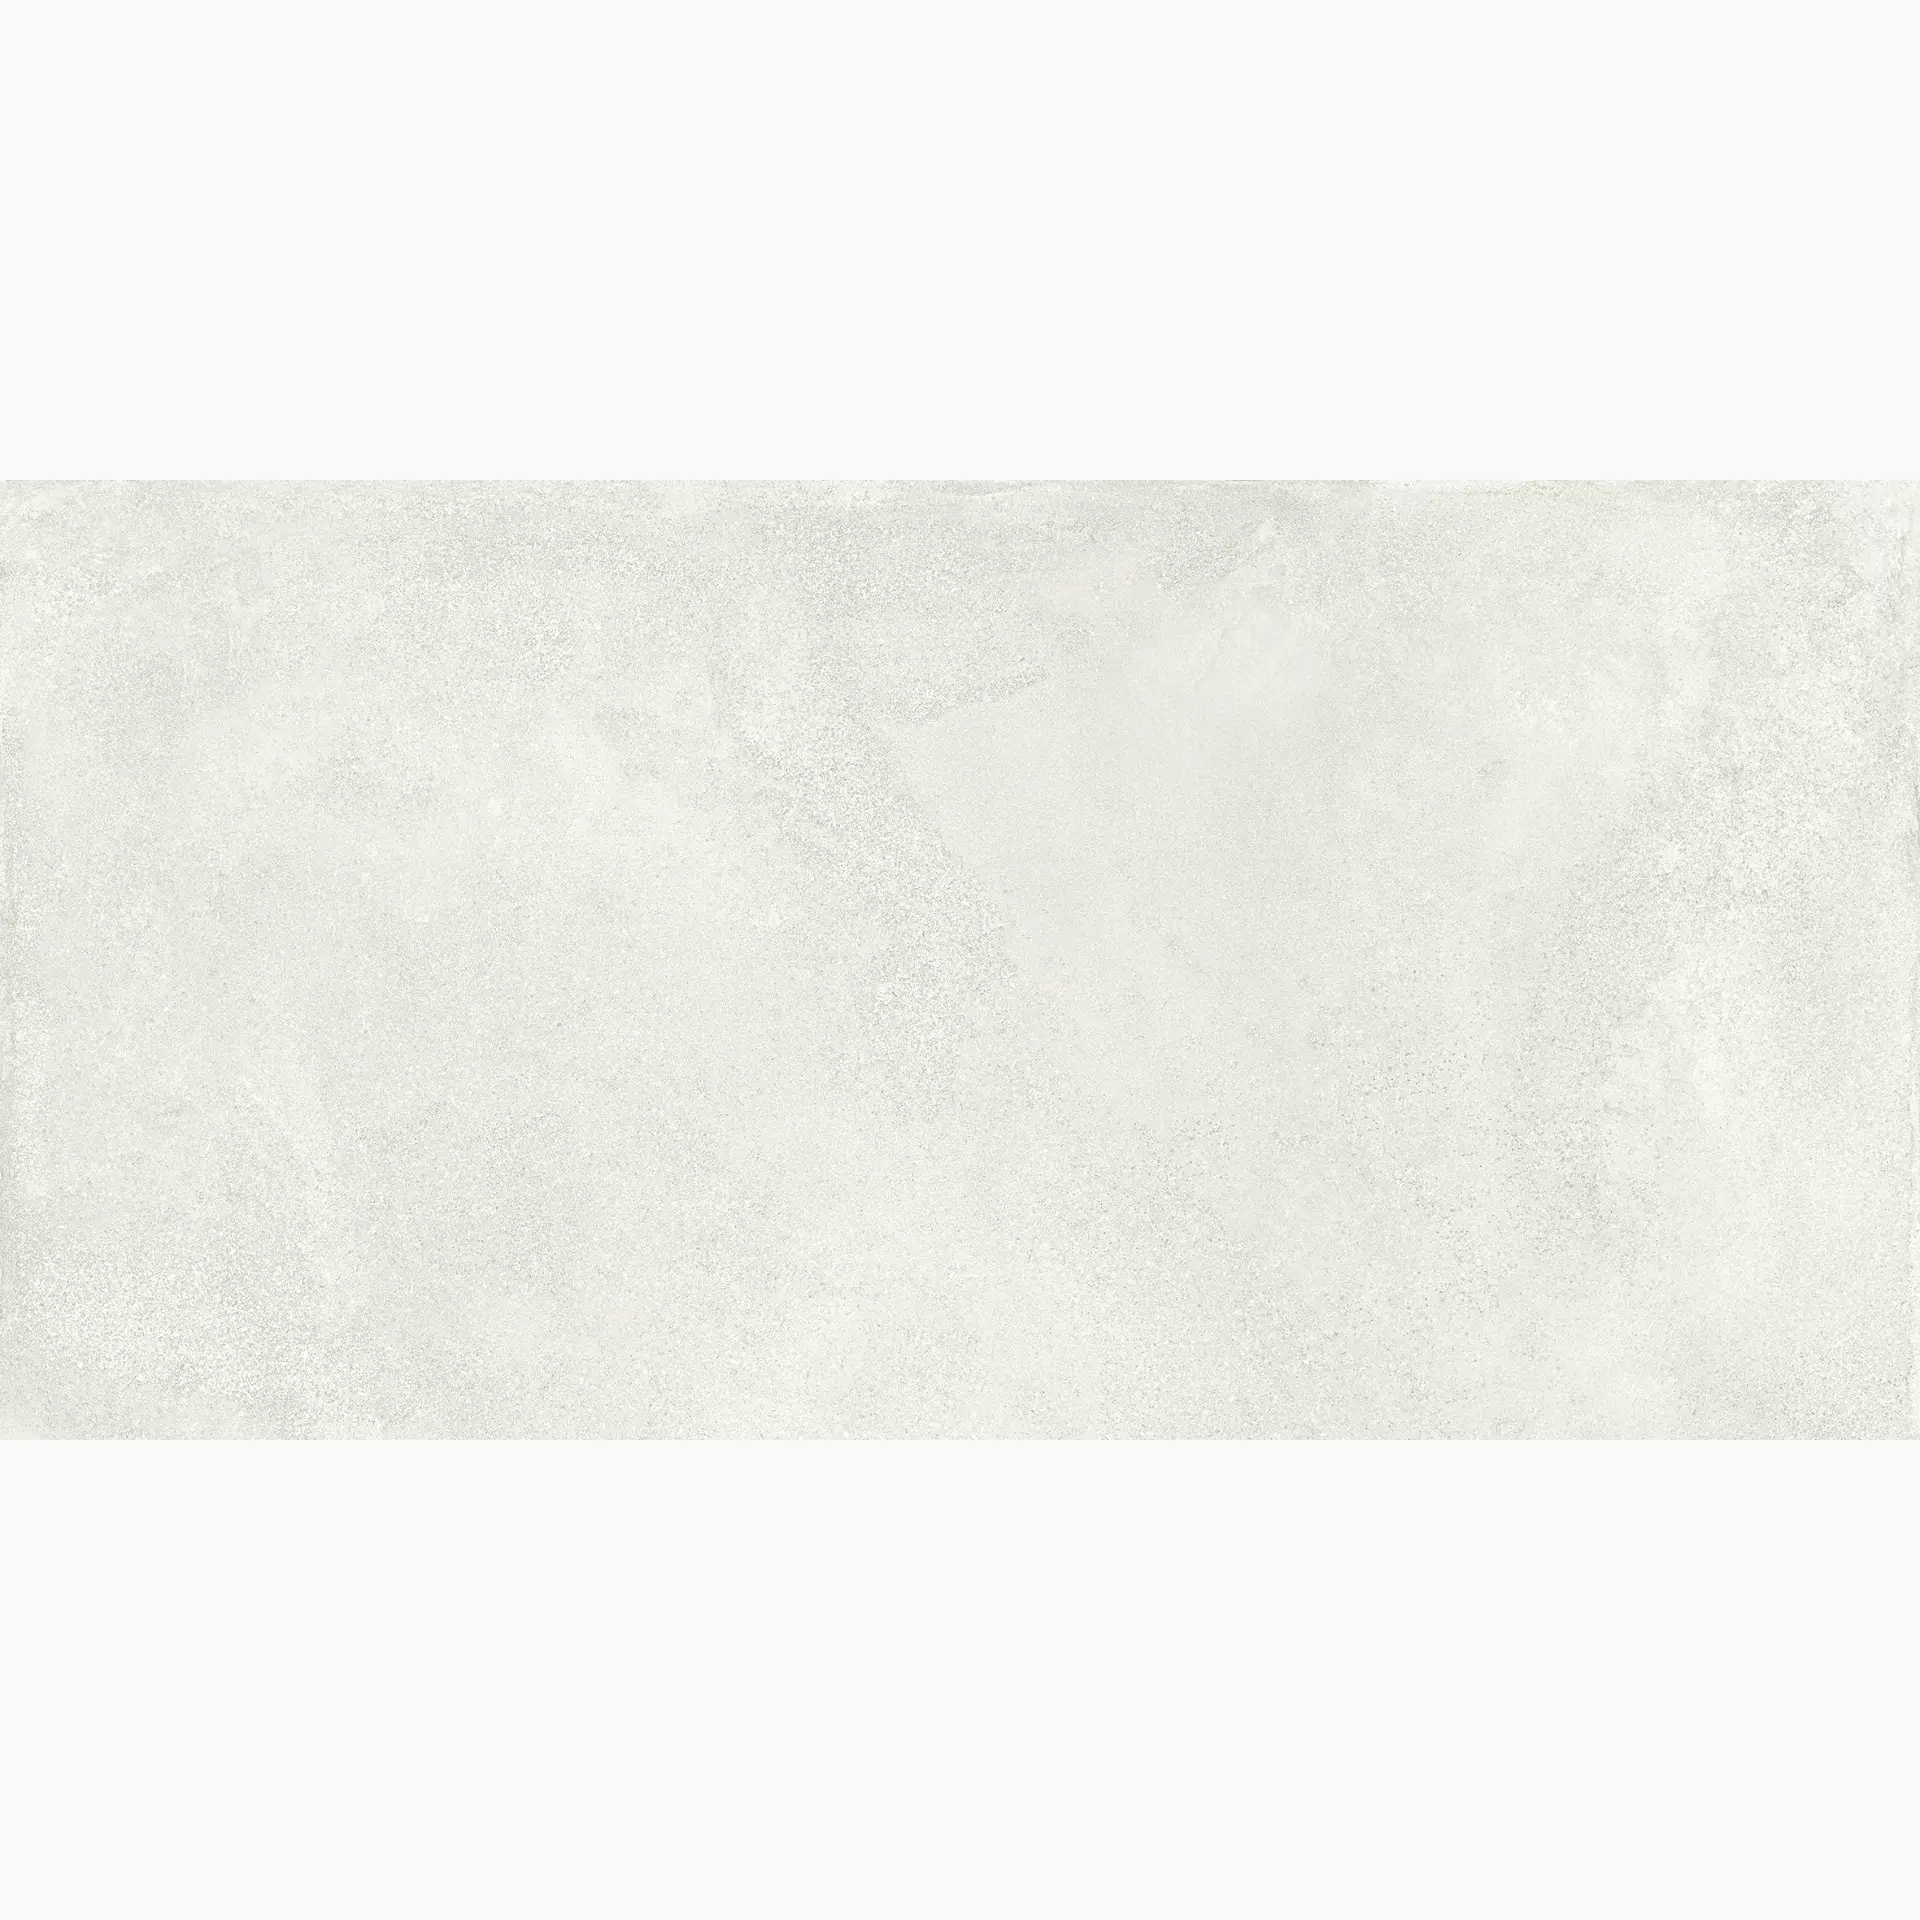 Emilceramica Be-Square Ivory Naturale ECX3 40x80cm rectified 9,5mm